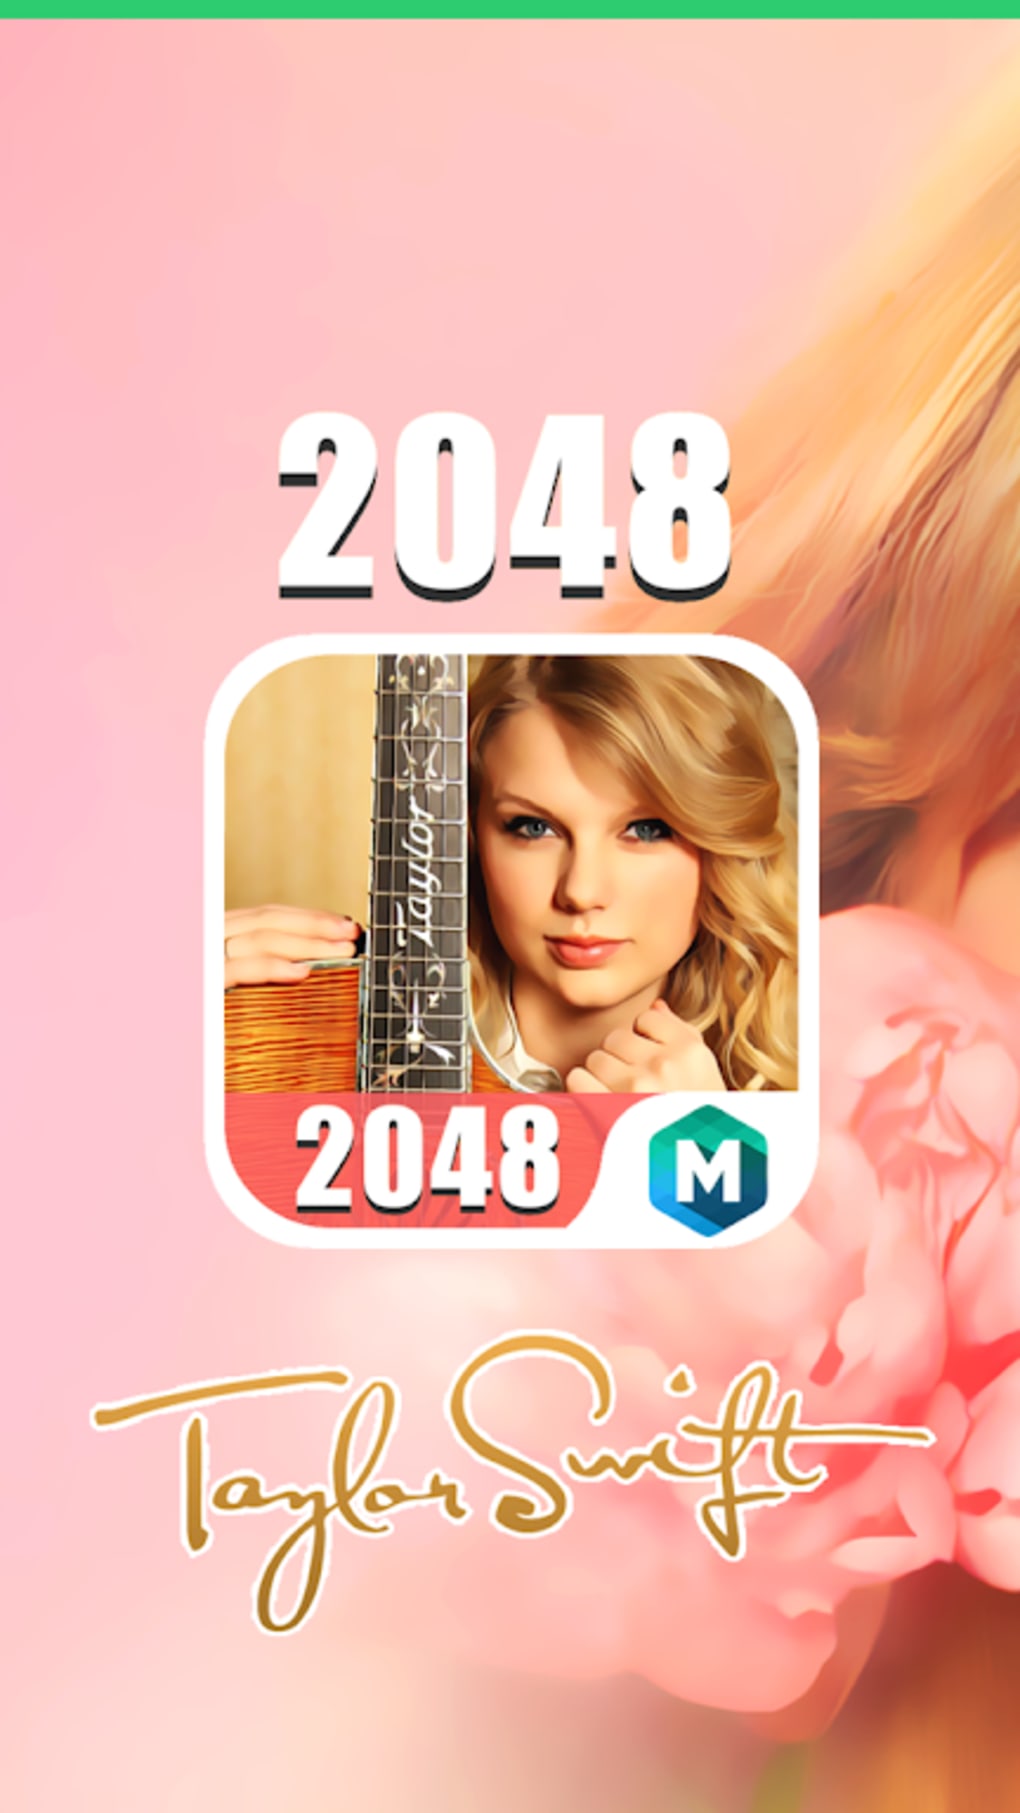 Where To Play Taylor Swift 2048 Game